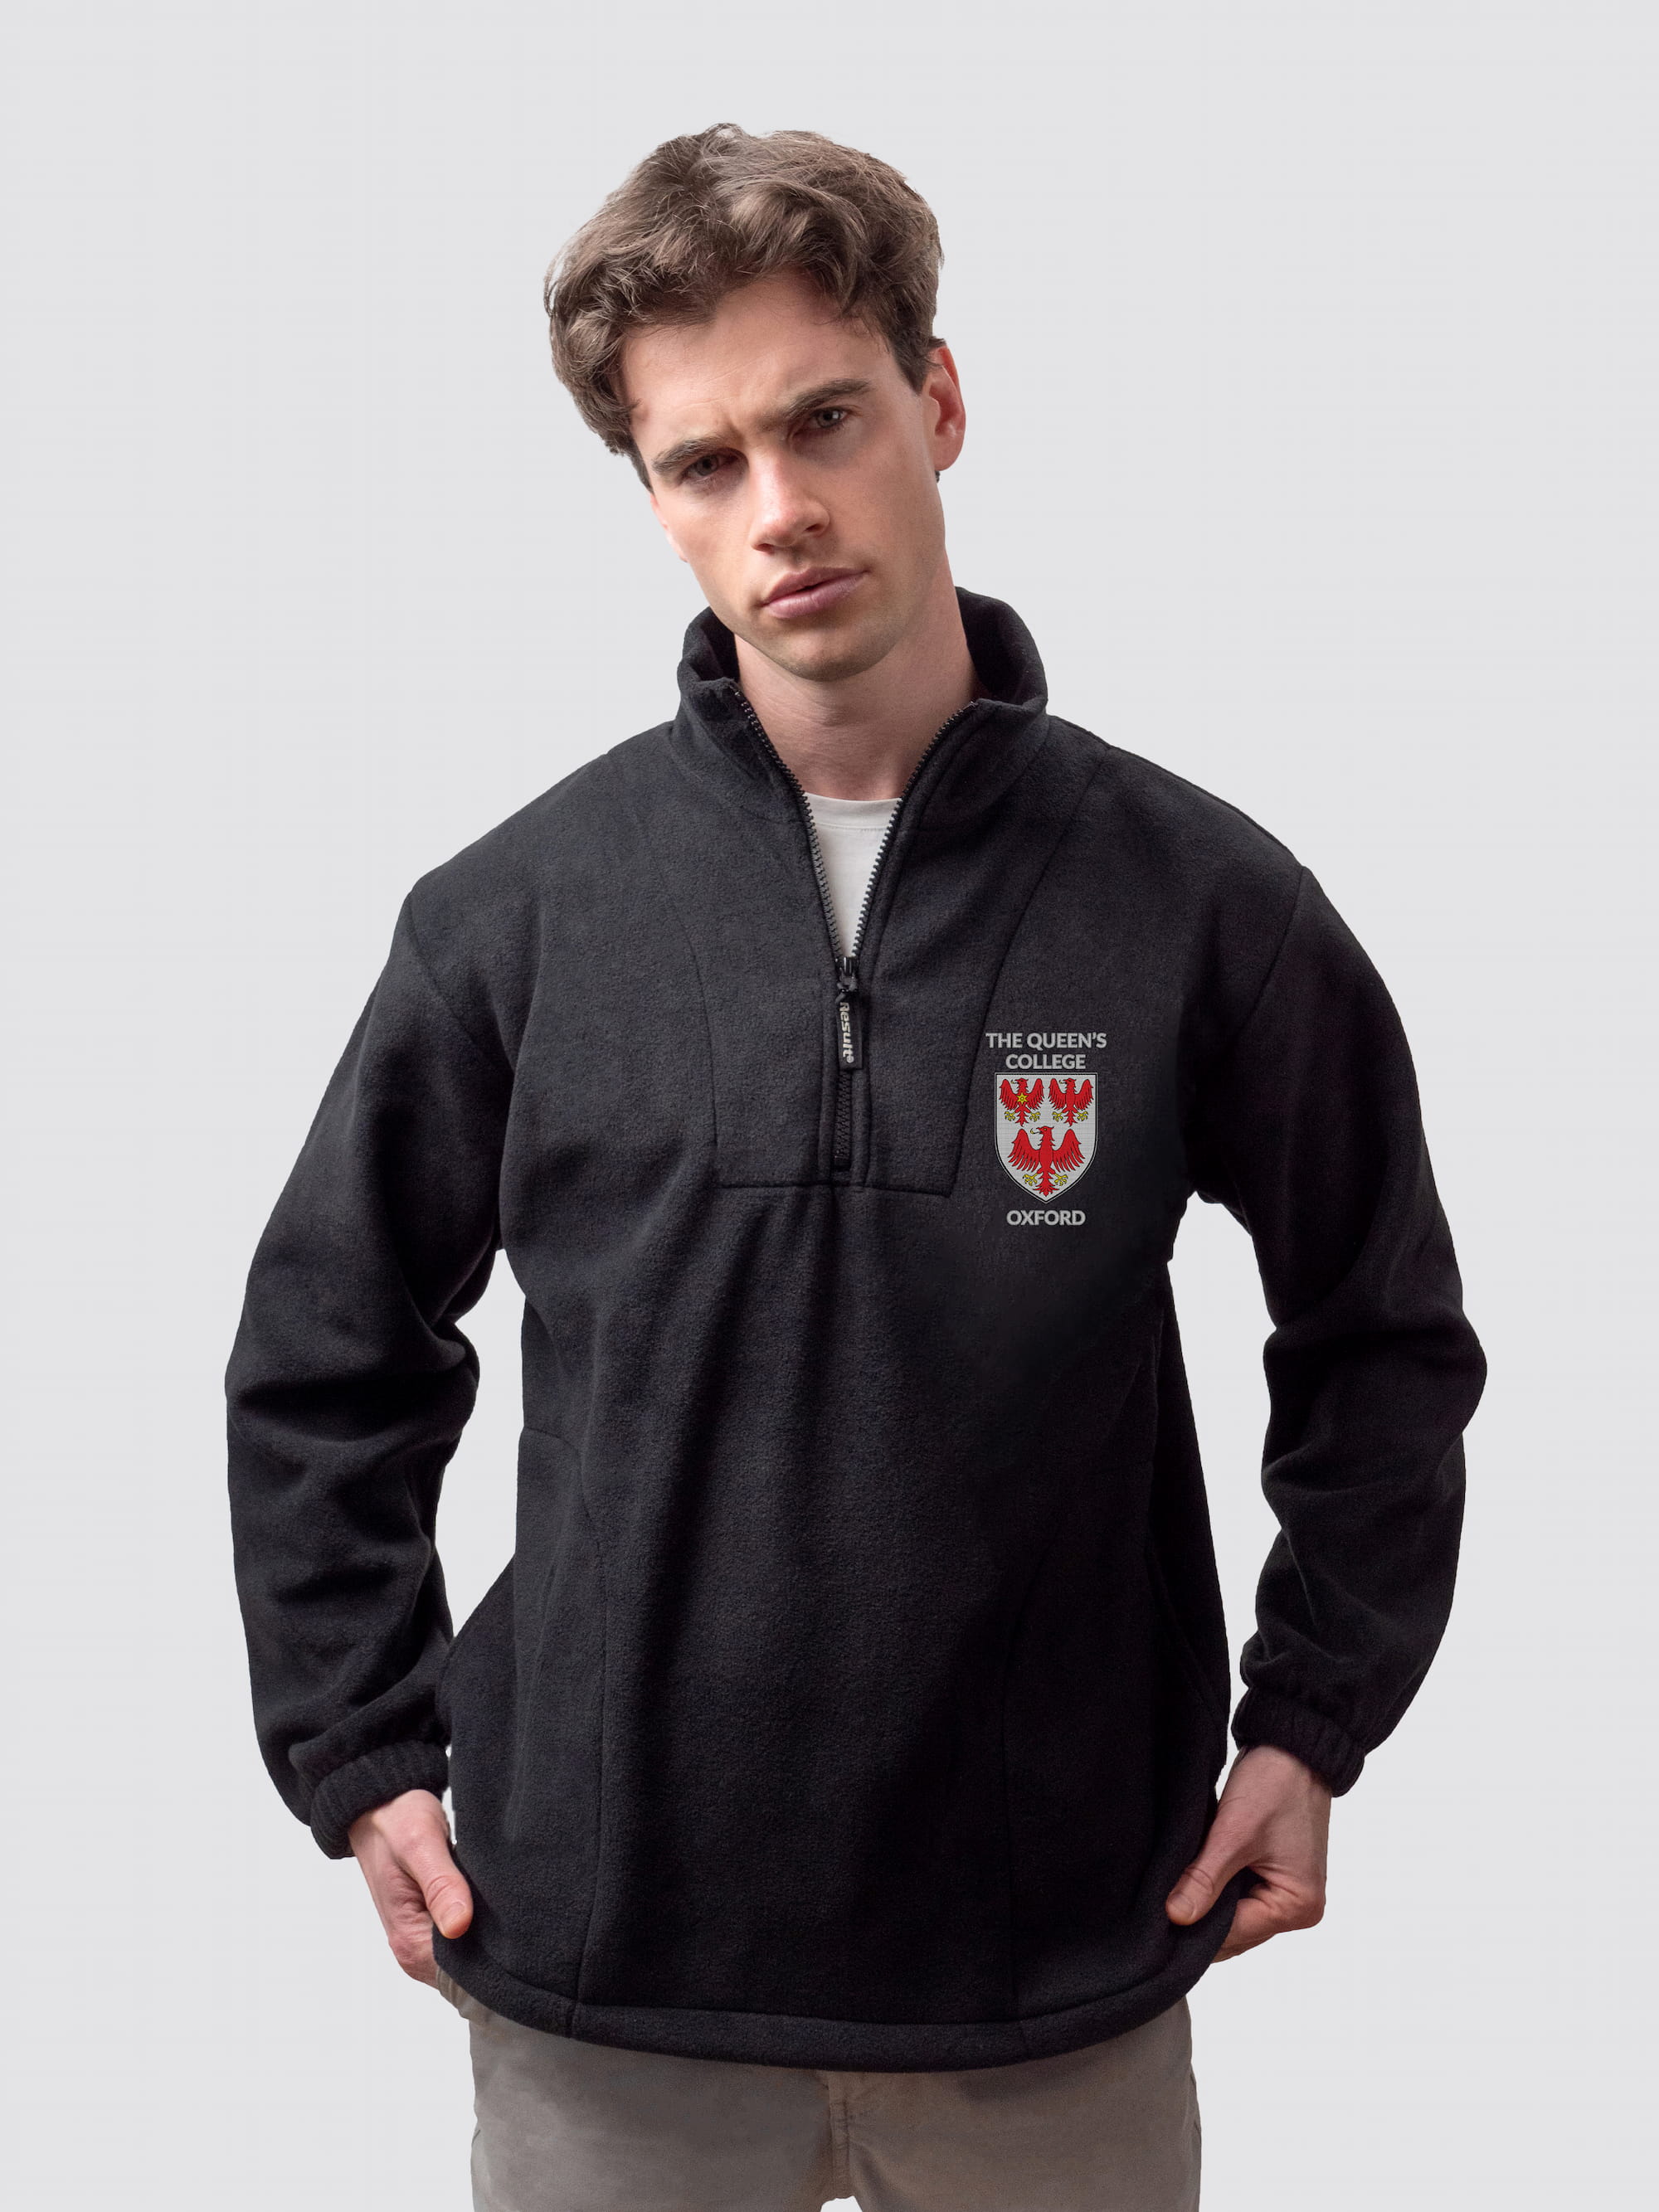 Oxford university fleece, with custom embroidered initials and The Queen's crest